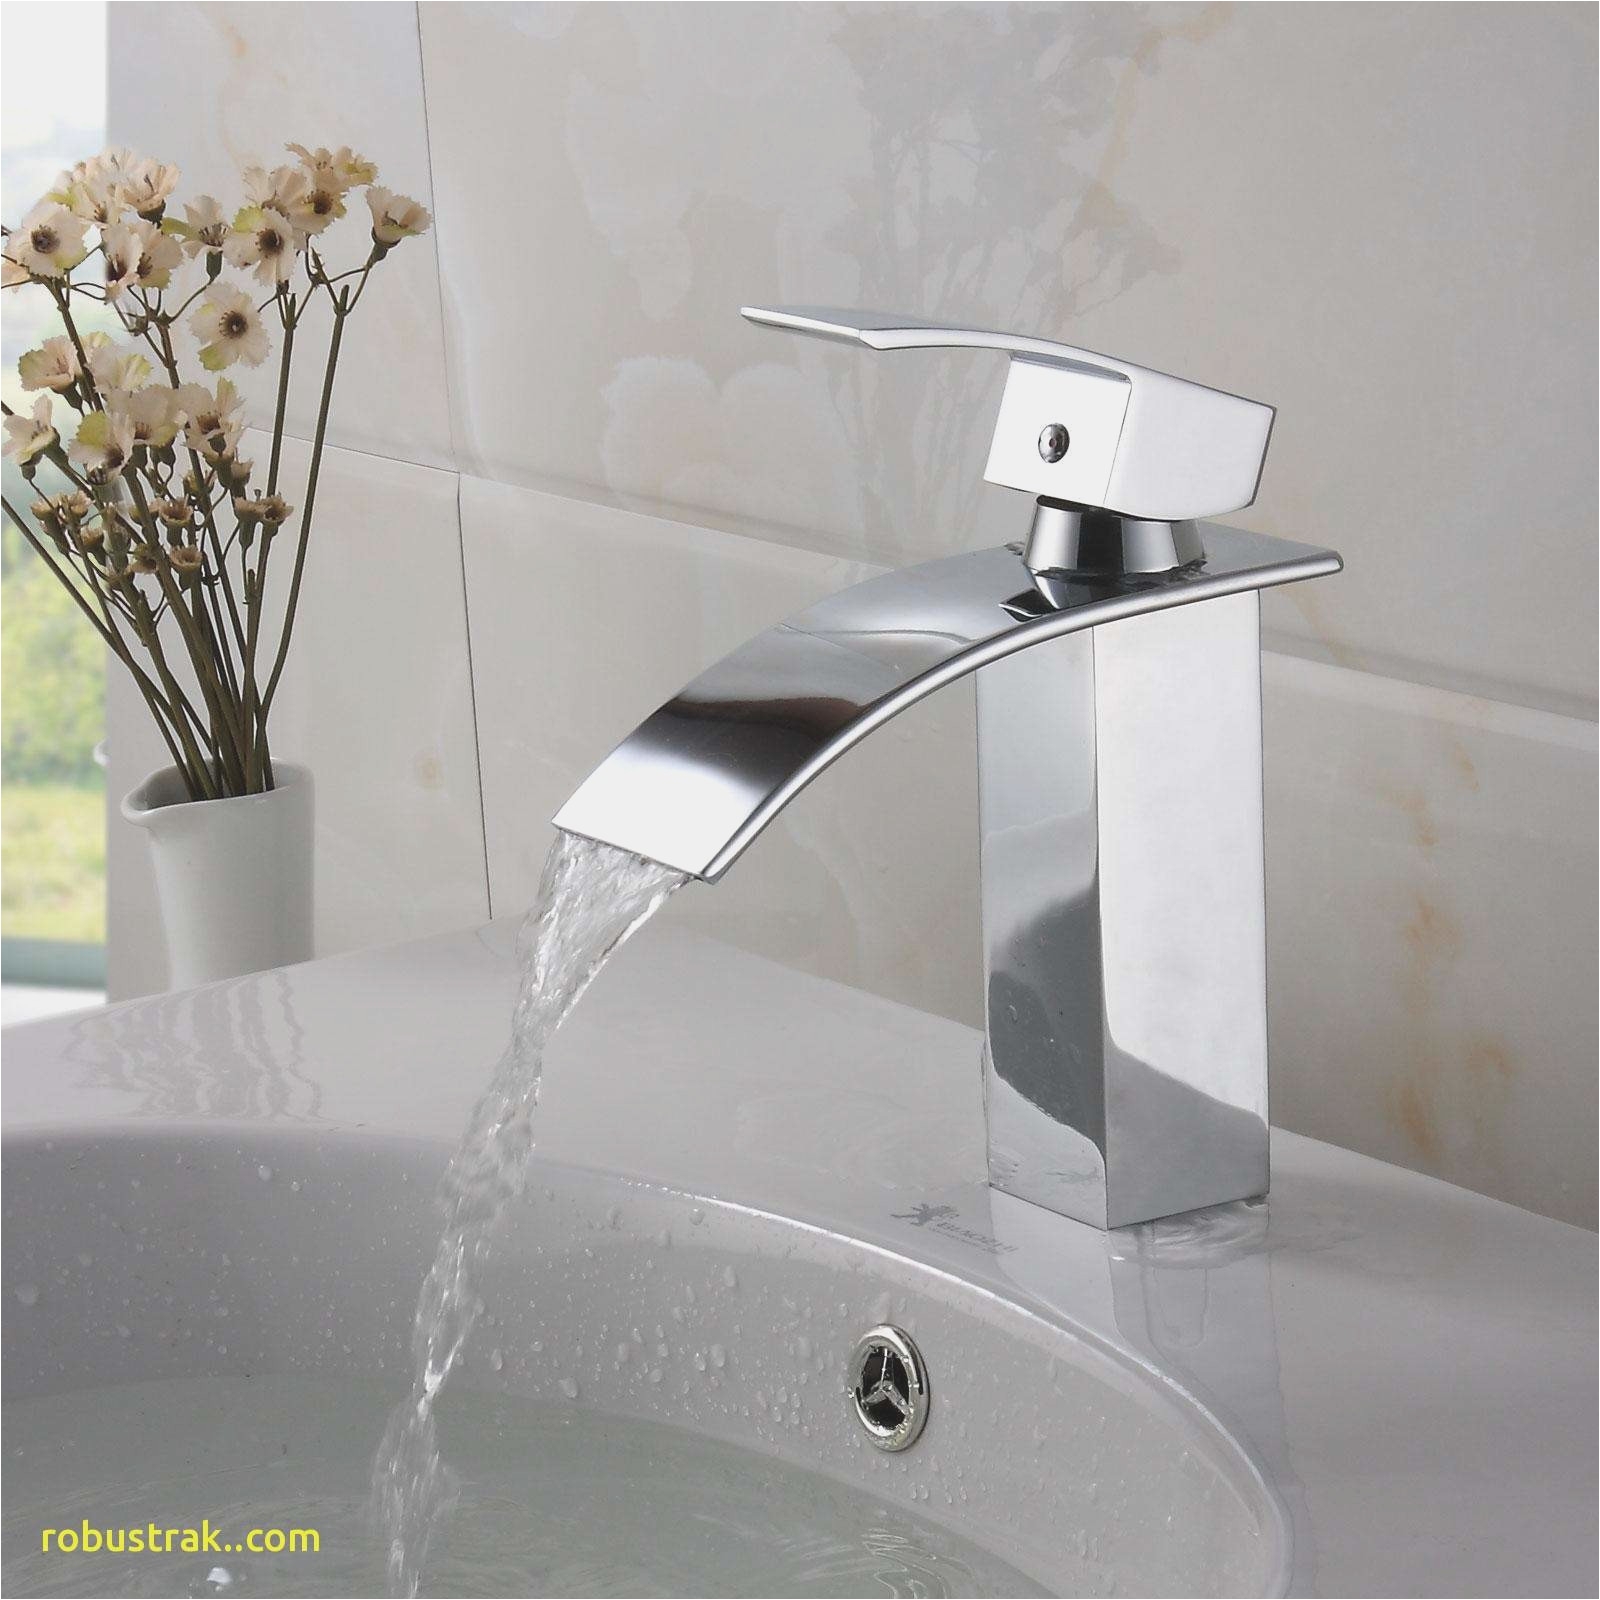 bathroom sink stopper types awesome 1 4 bathroom inspirational types bathroom faucets h sink bathroom